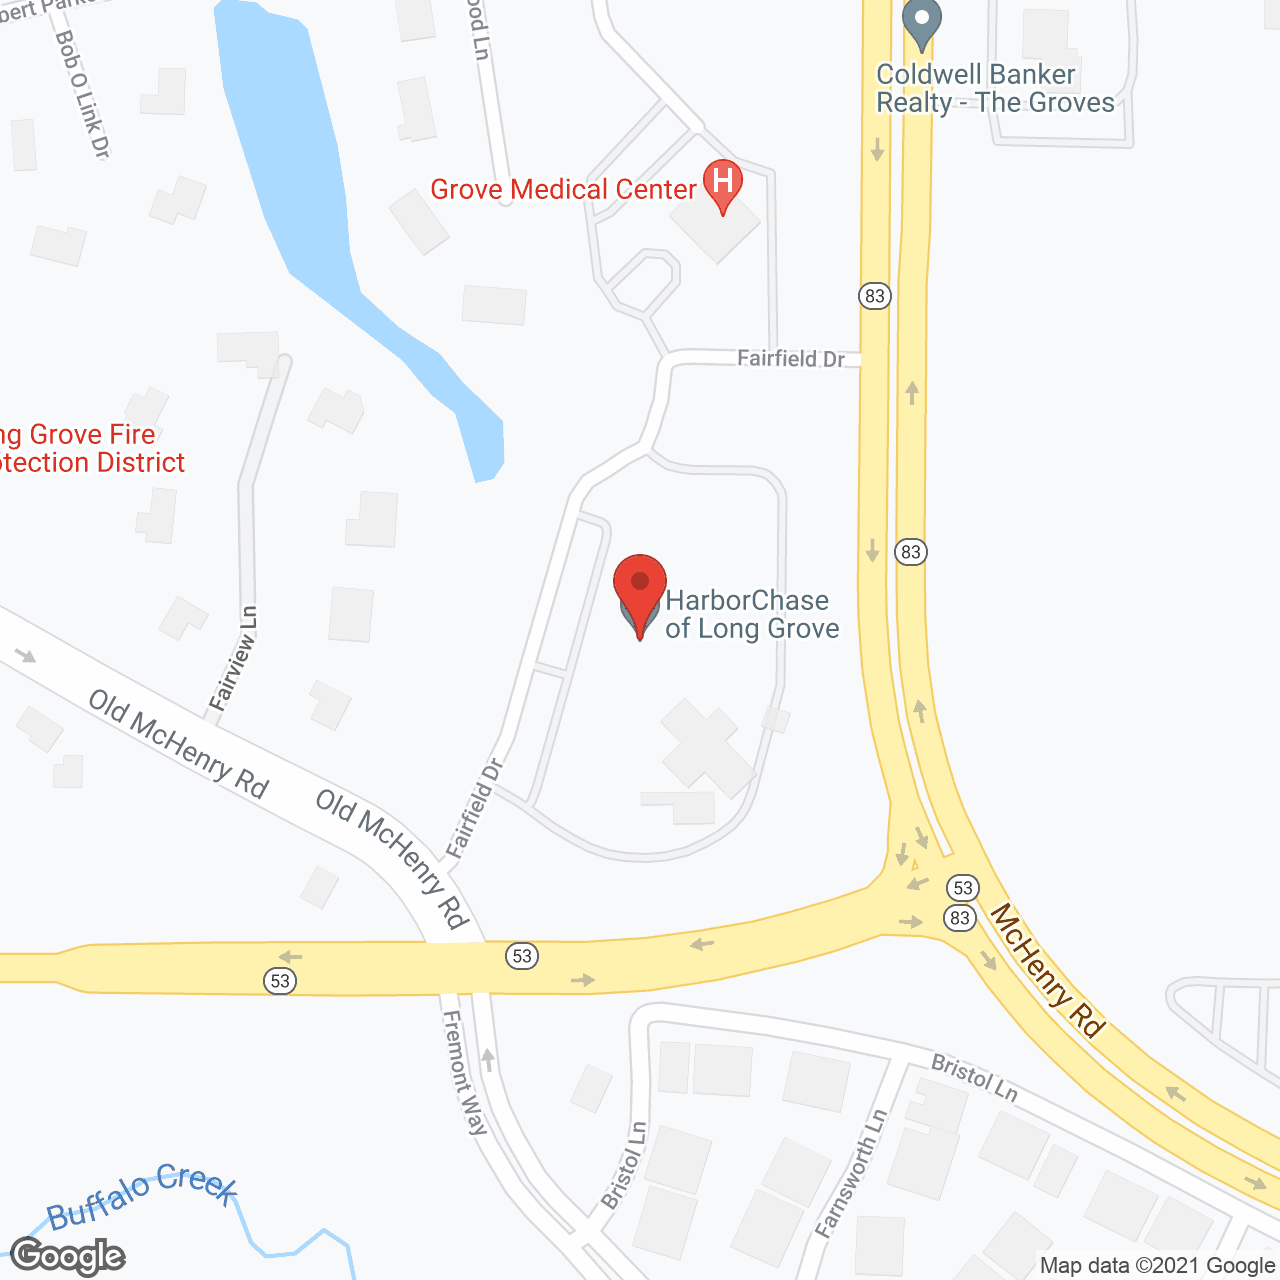 HarborChase of Long Grove in google map